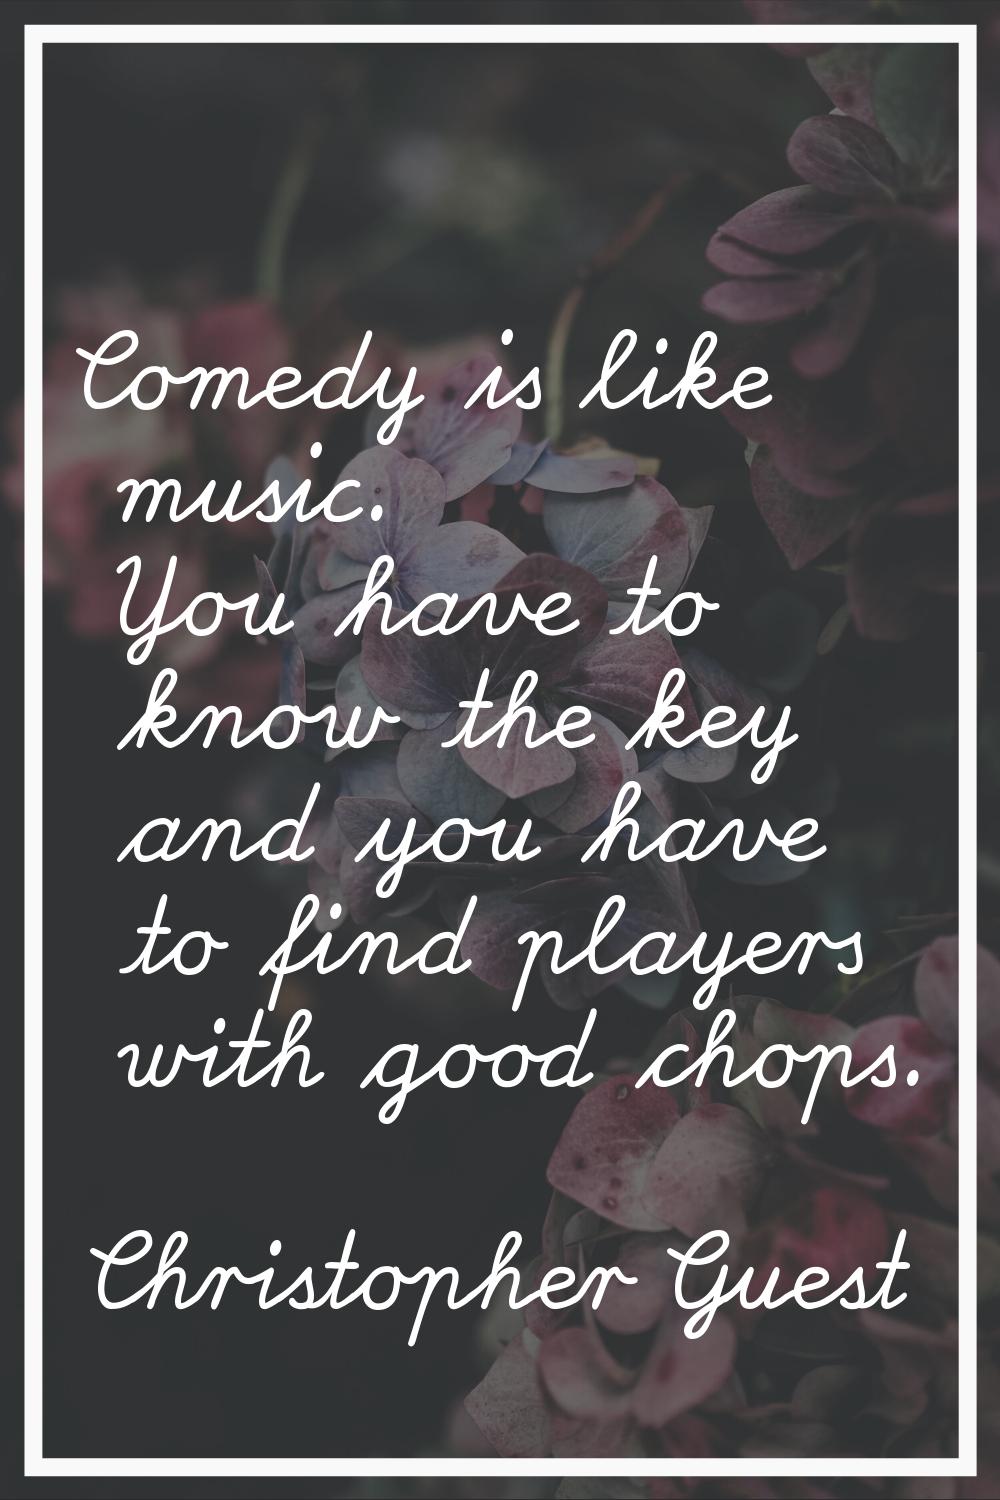 Comedy is like music. You have to know the key and you have to find players with good chops.